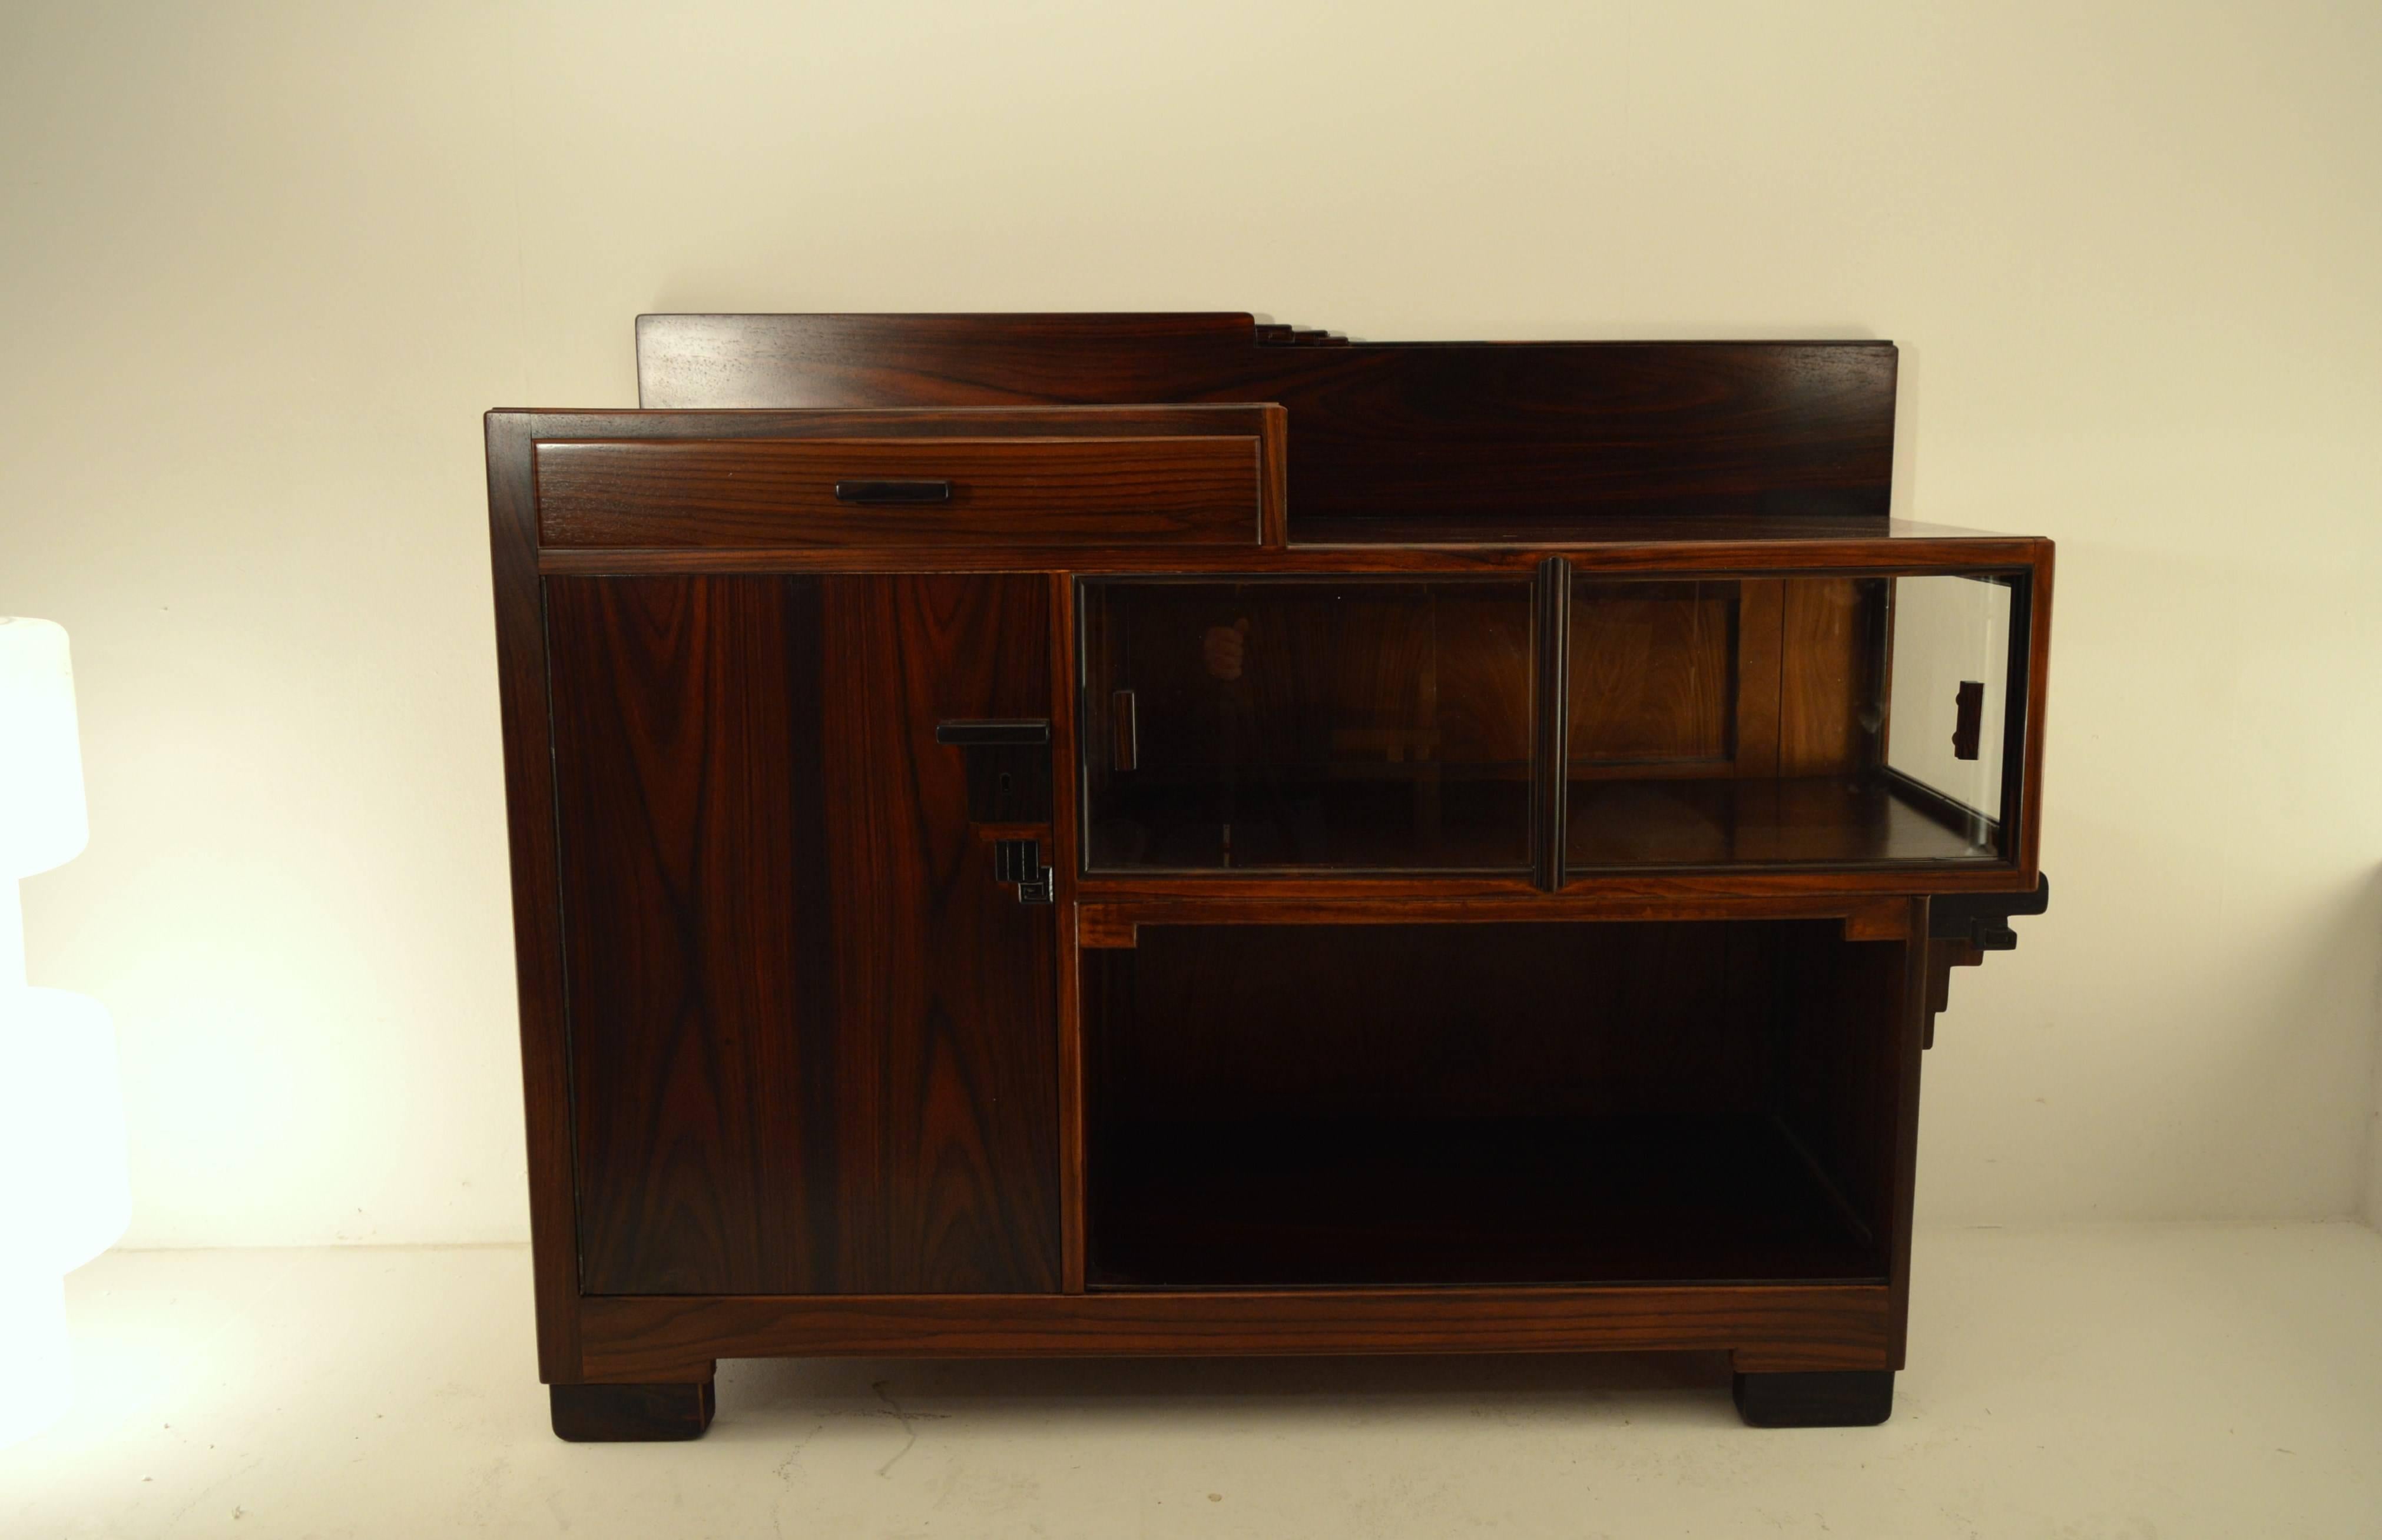 Mid-20th Century Amsterdam School Tea Cabinet in Rosewood with Ebony Details